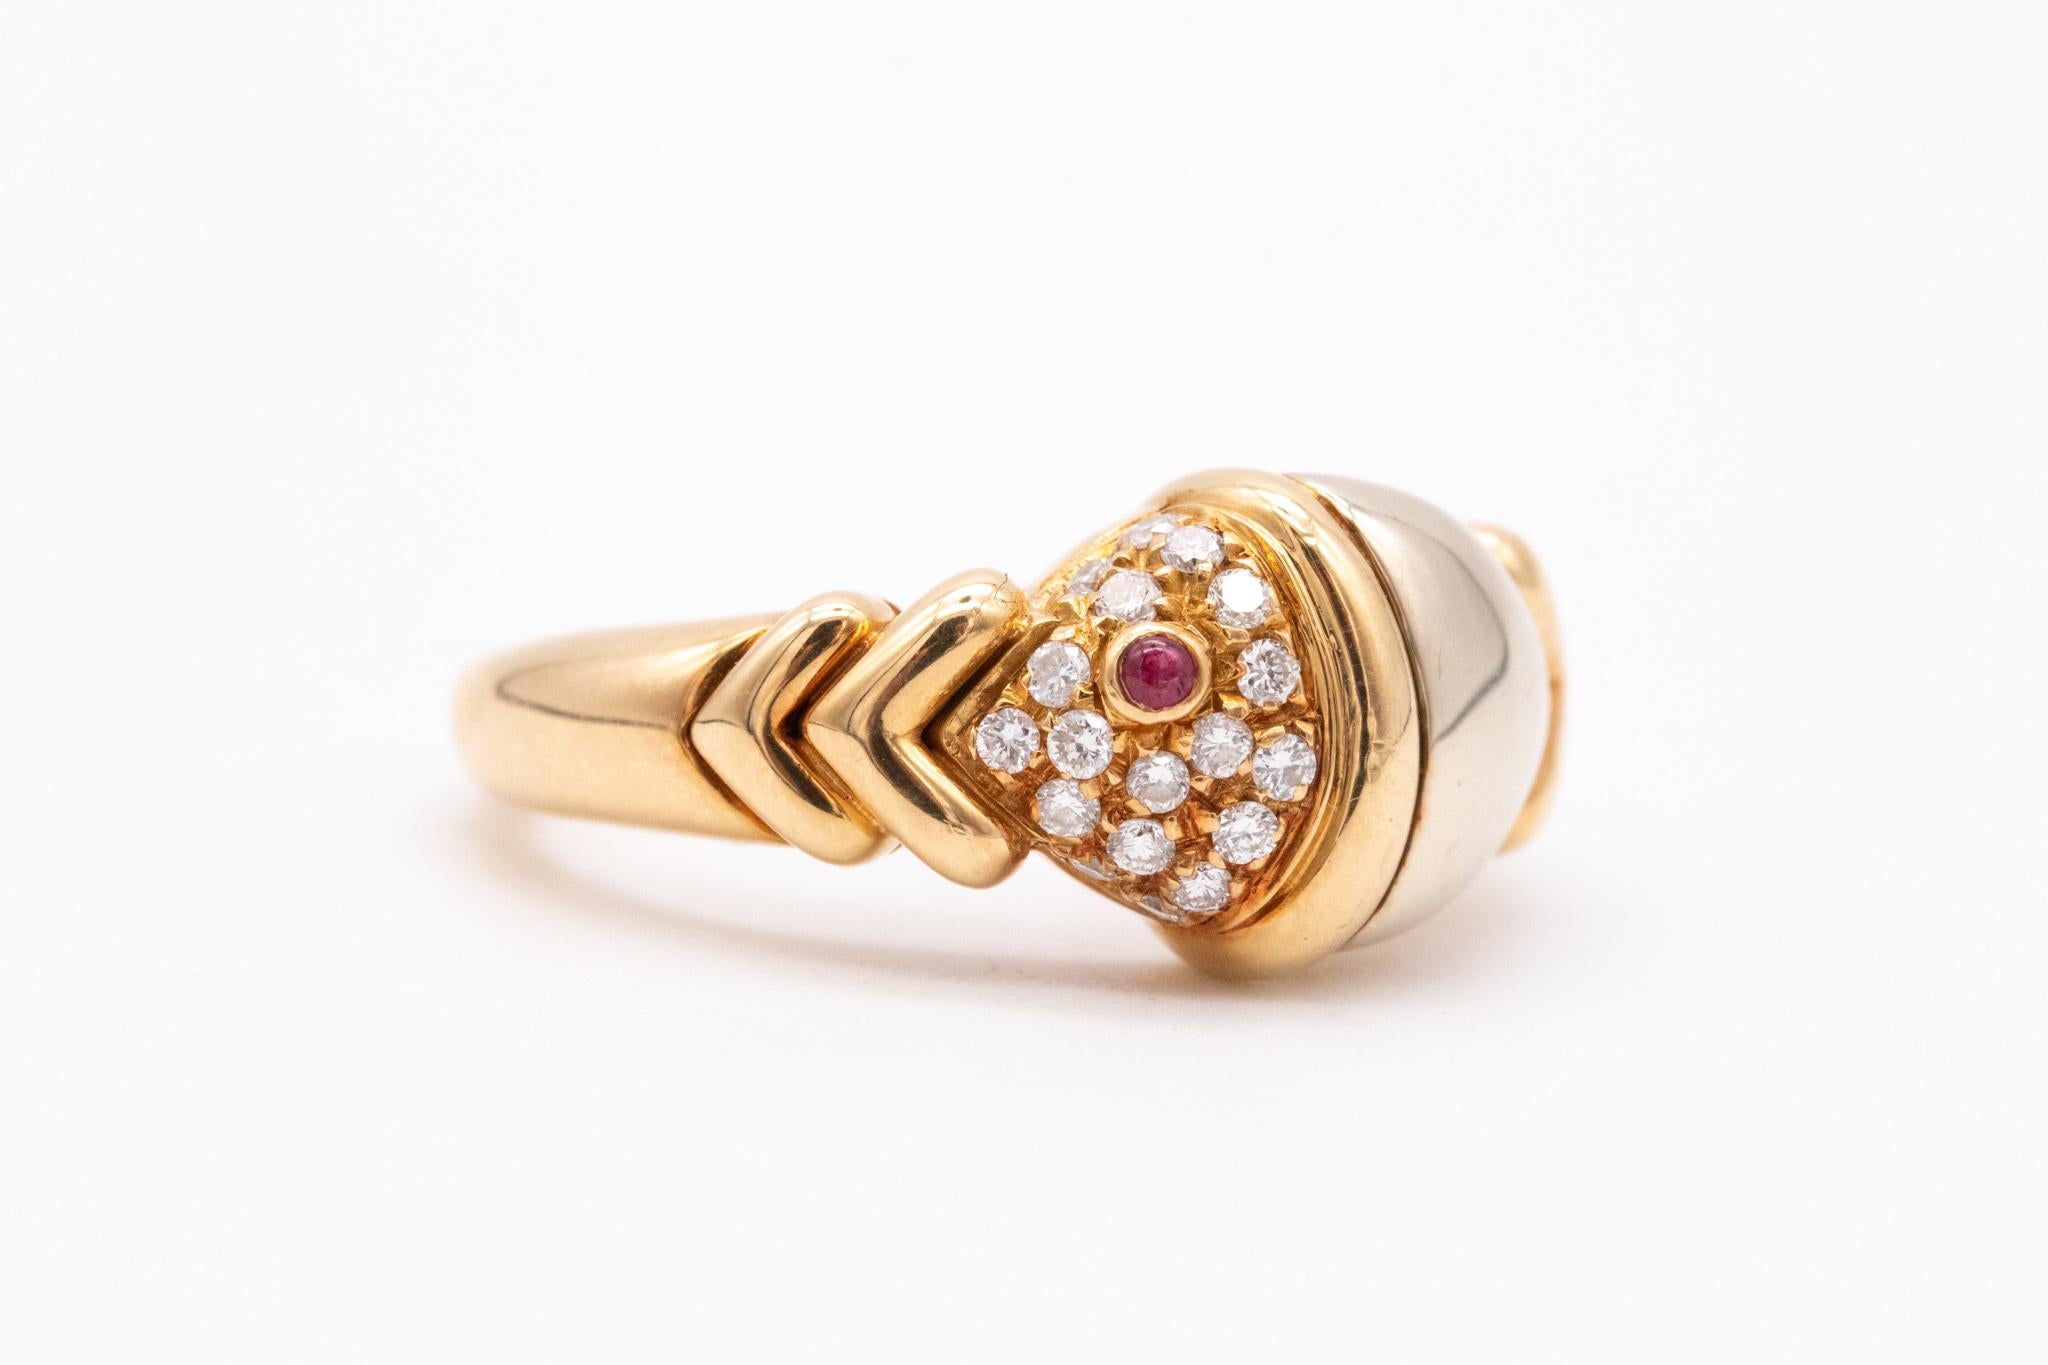 Women's Bvlgari Roma Fish Pesce Ring in 18Kt Two Tones Gold with Diamonds and Ruby